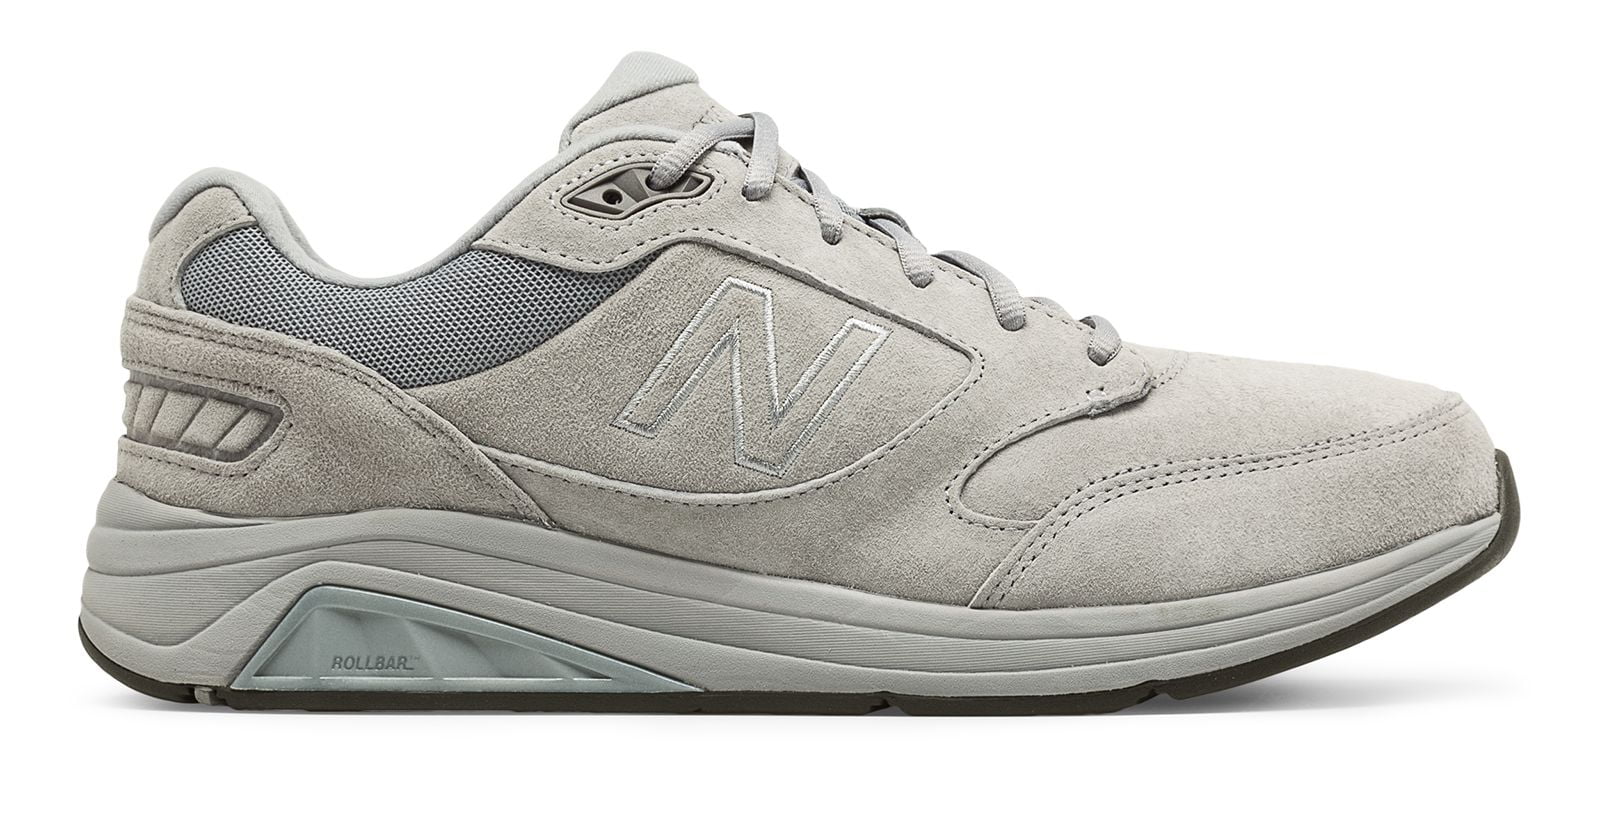 New Balance 928 Shoes Reviews | tunersread.com